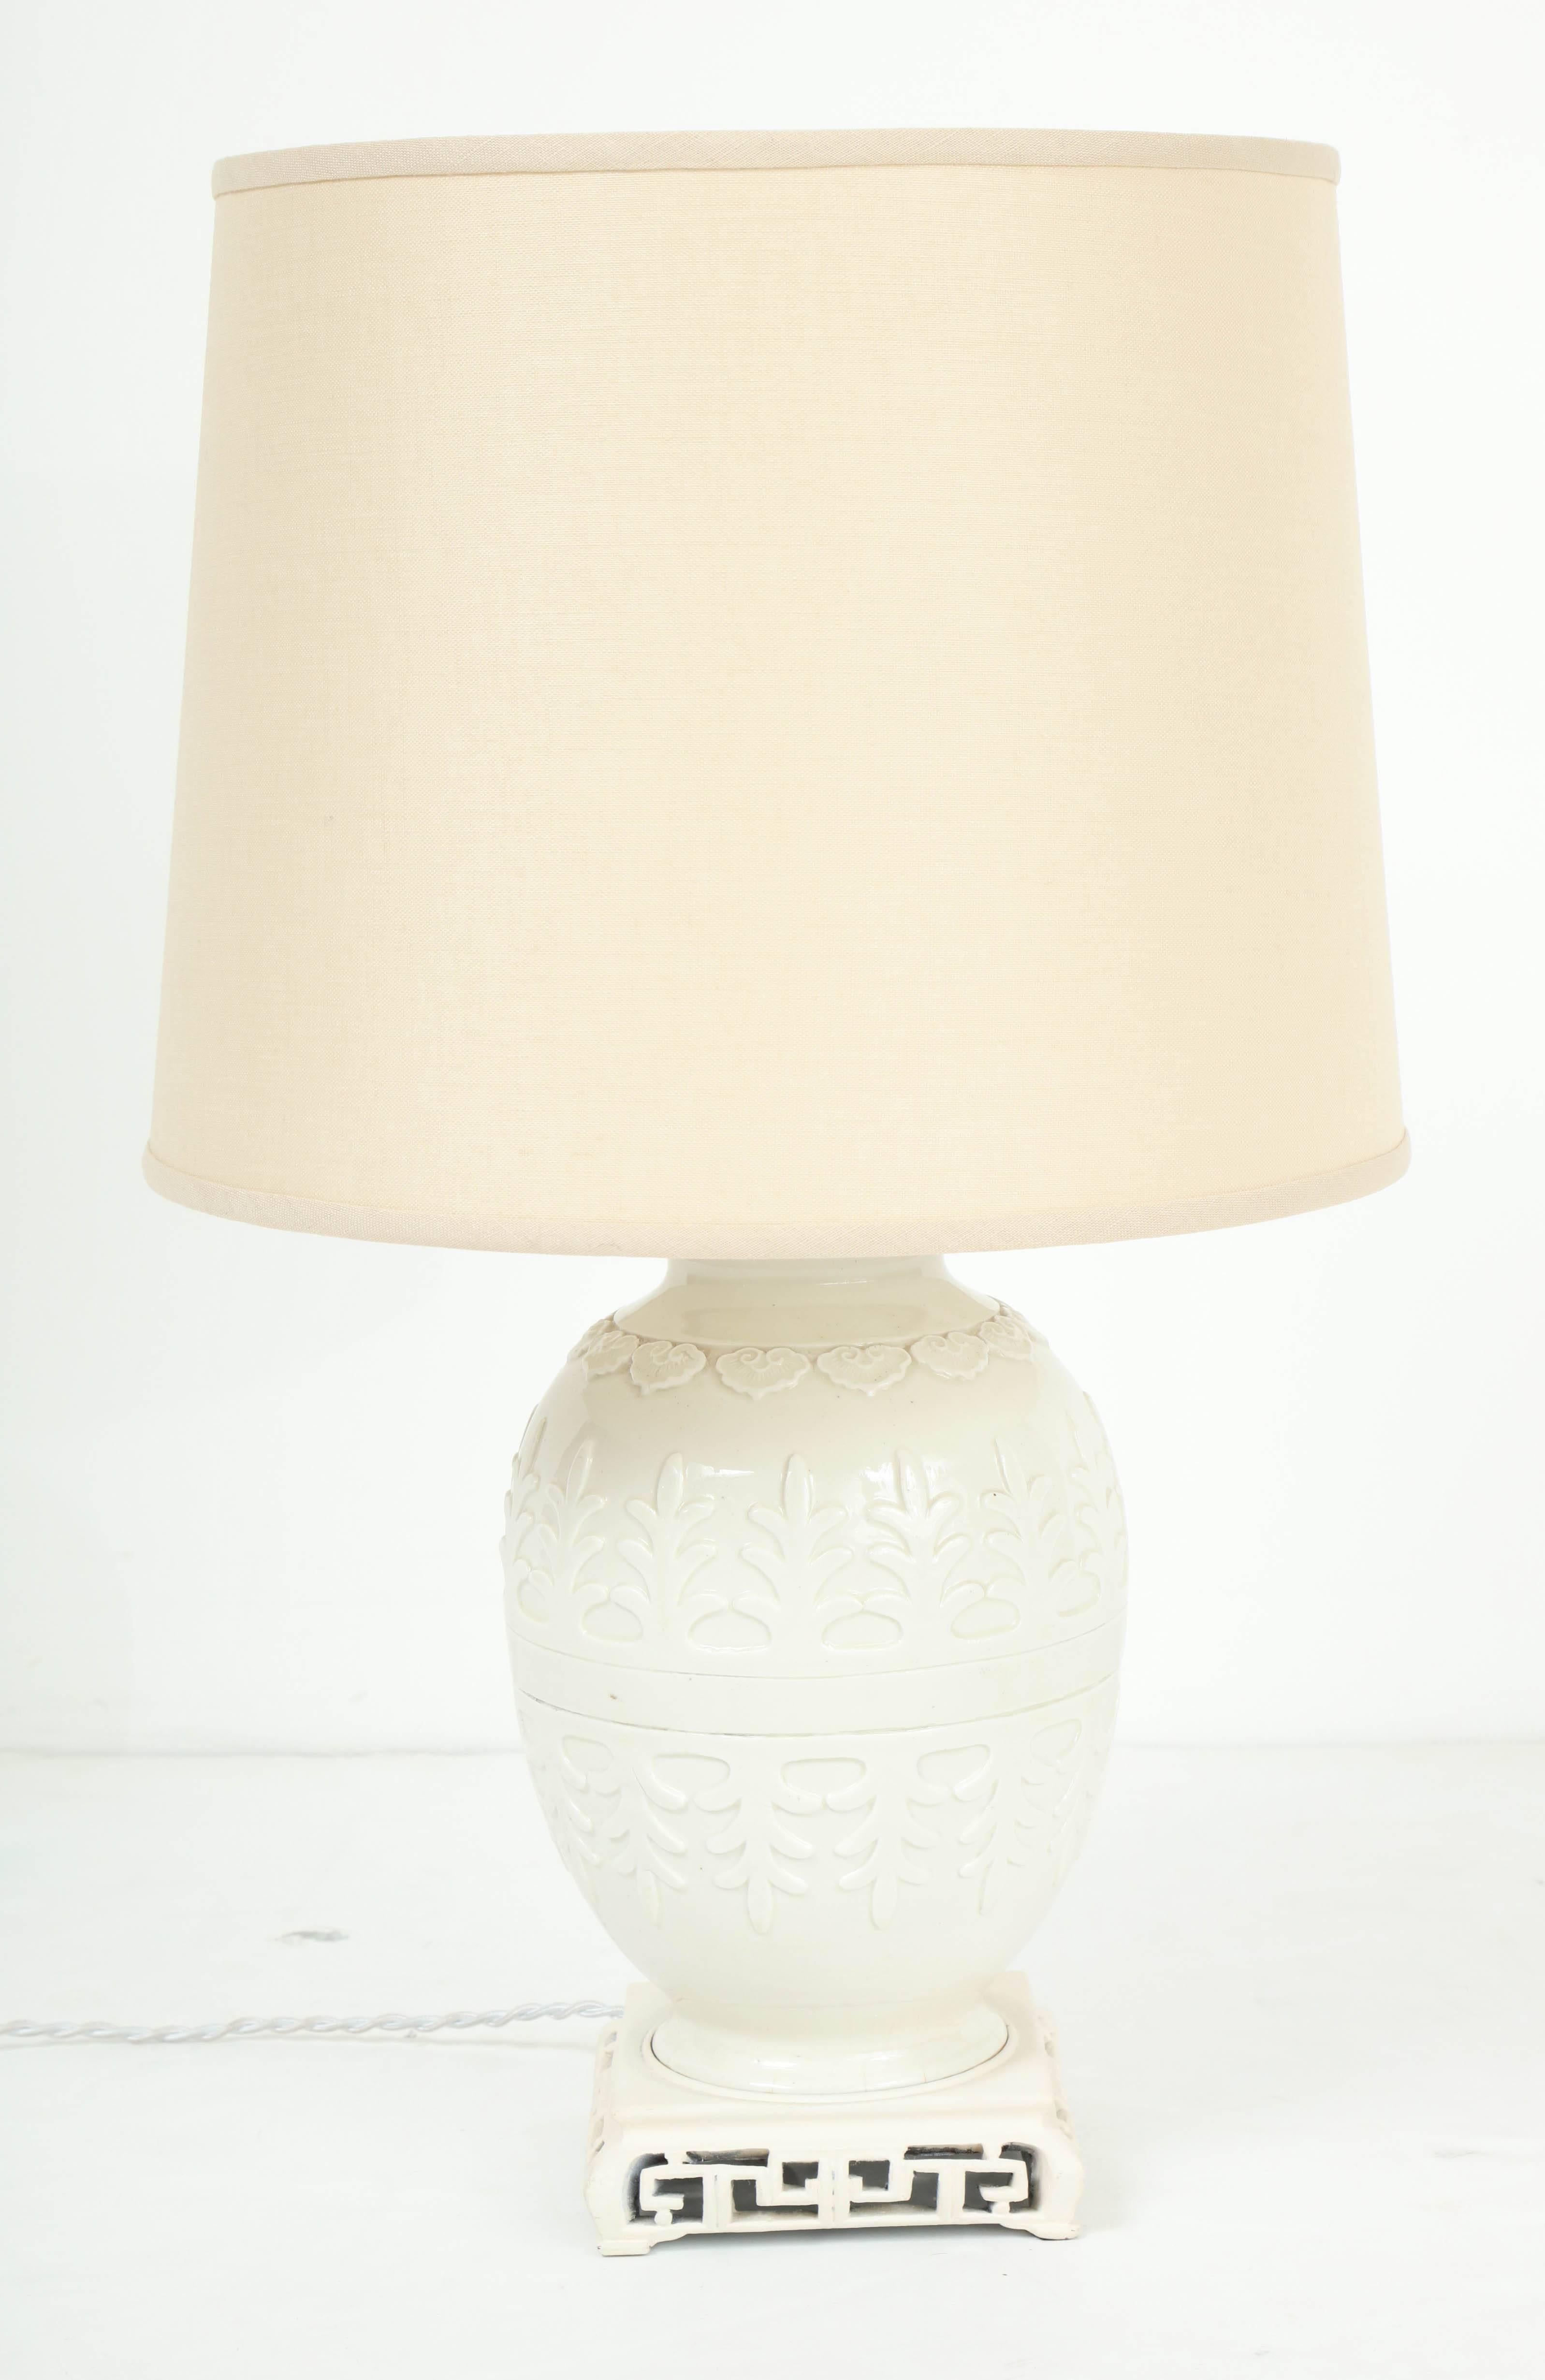 Blanc de Chine ovoid table lamp with original carved base, circa 1920.